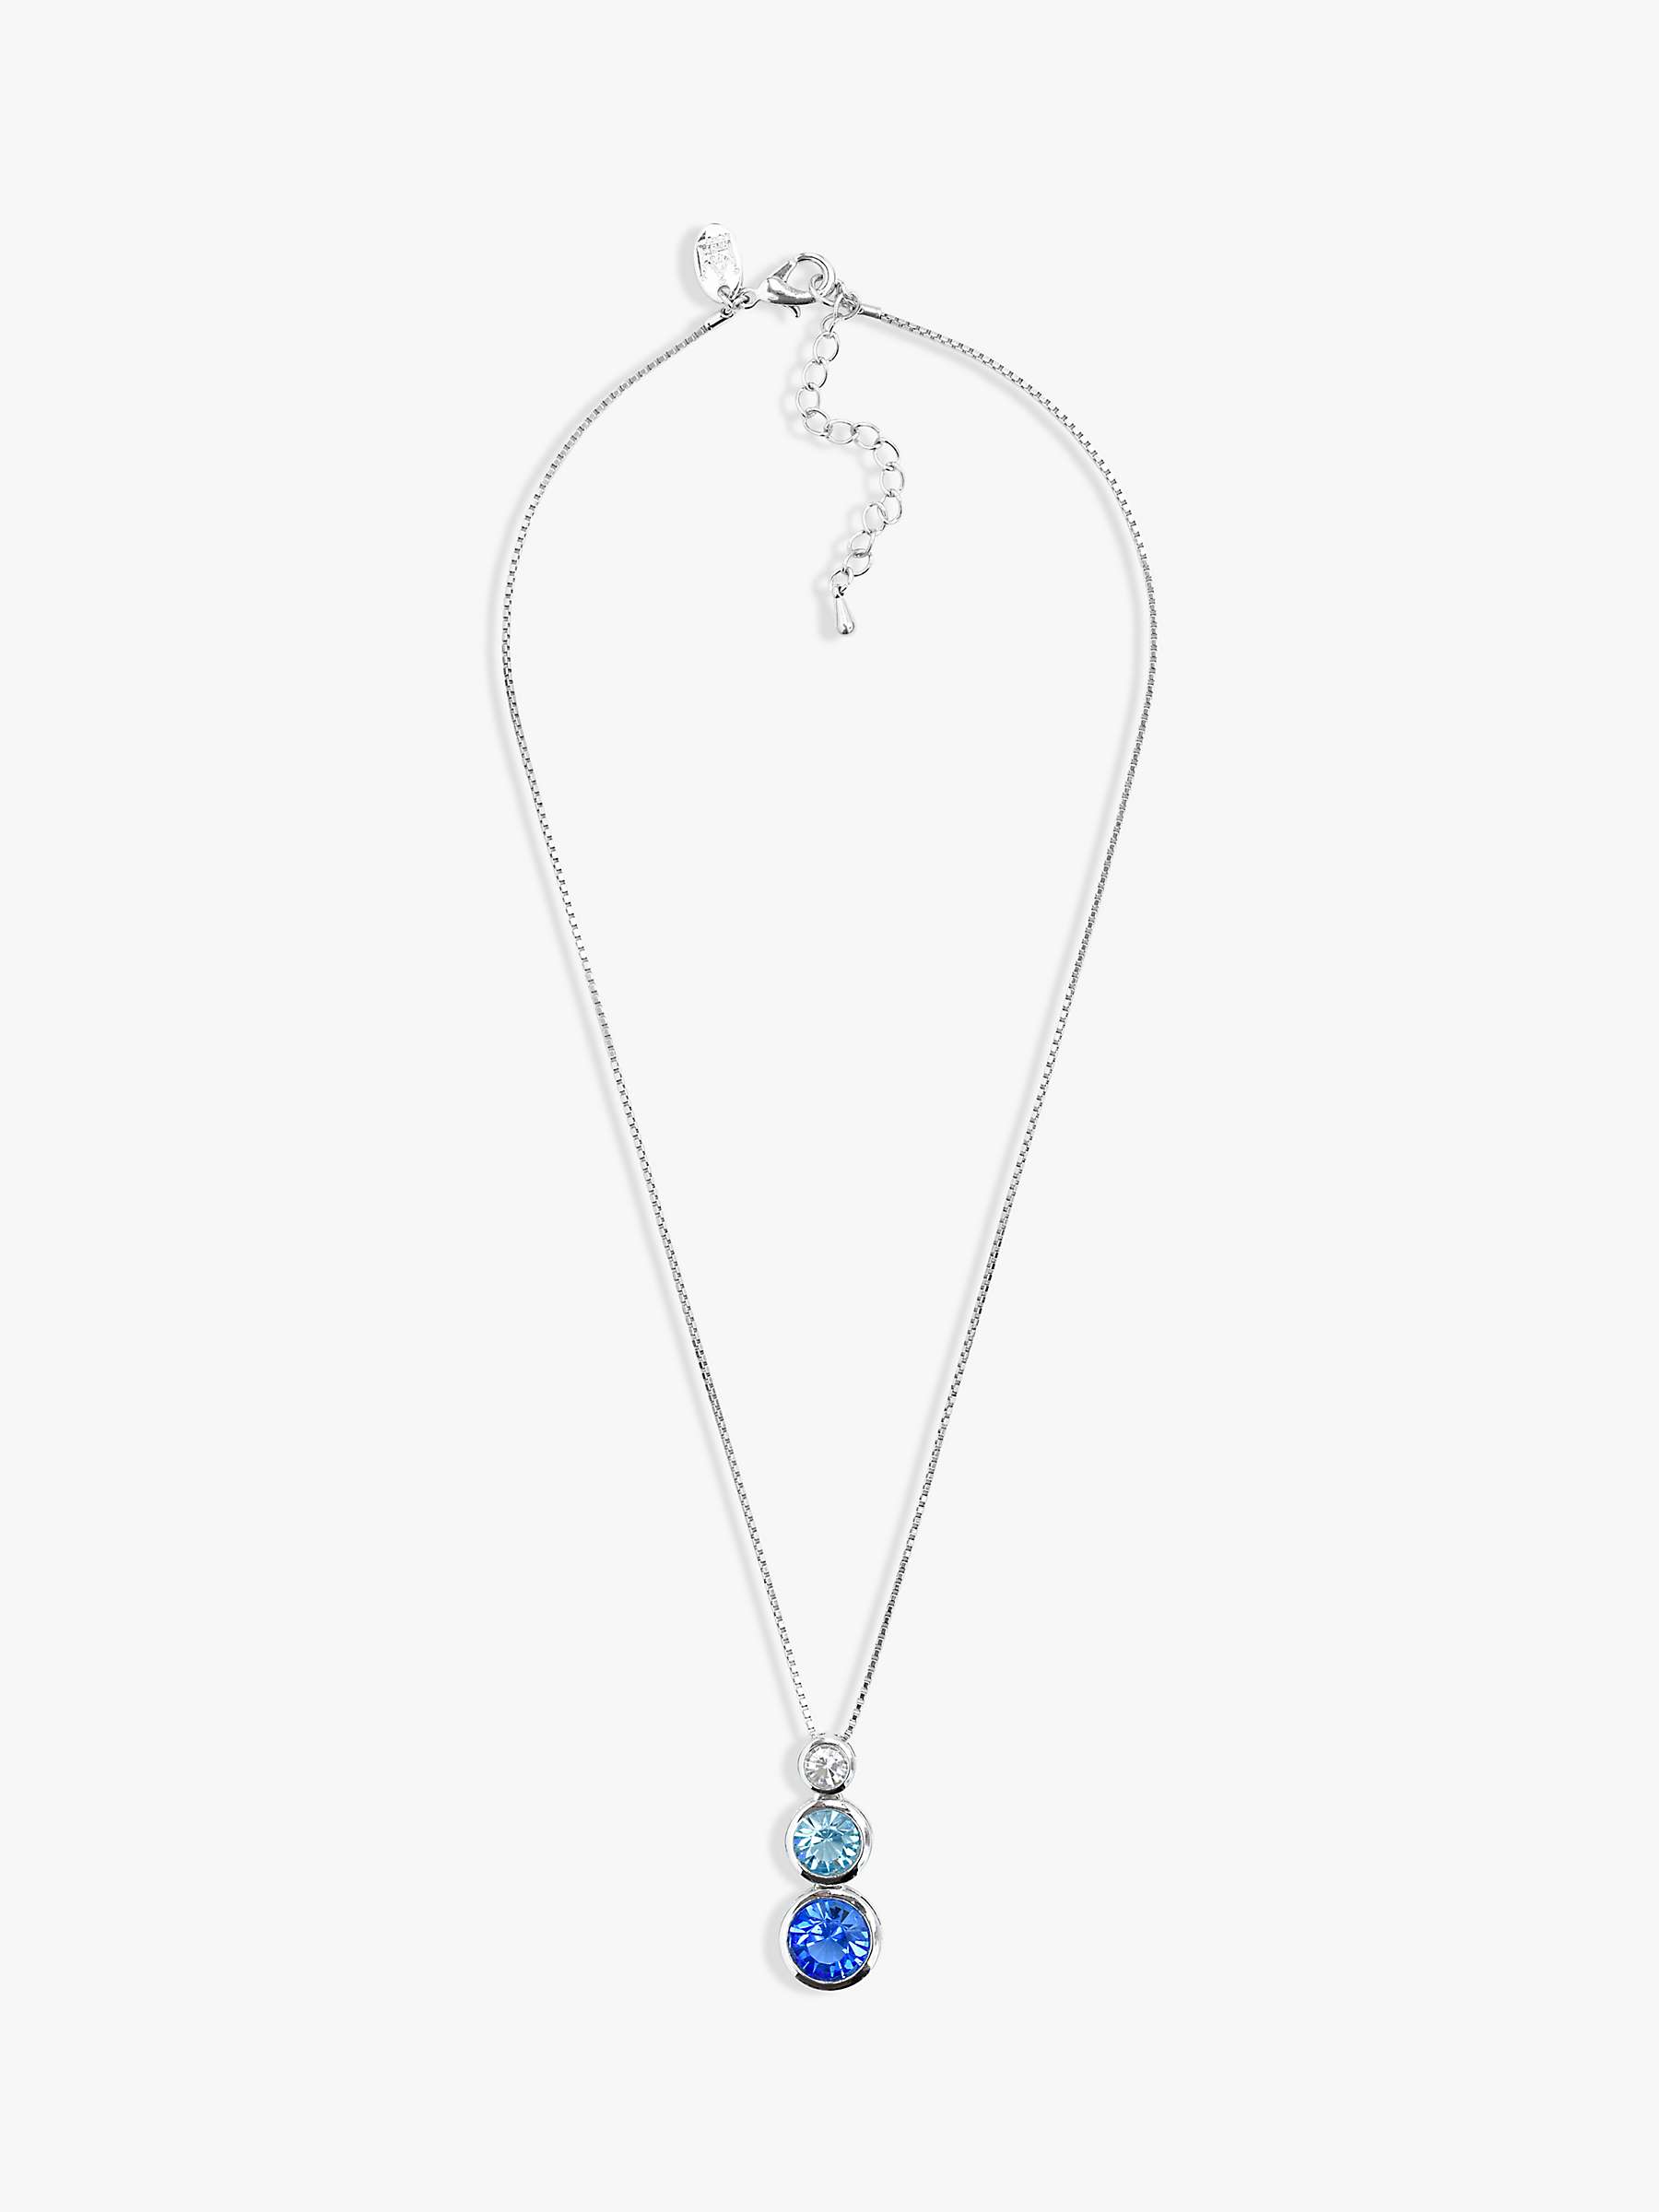 Buy Eclectica Vintage Rhodium Plated Swarovski Crystal Triple Drop Pendant Necklace, Dated Circa 1990s Online at johnlewis.com